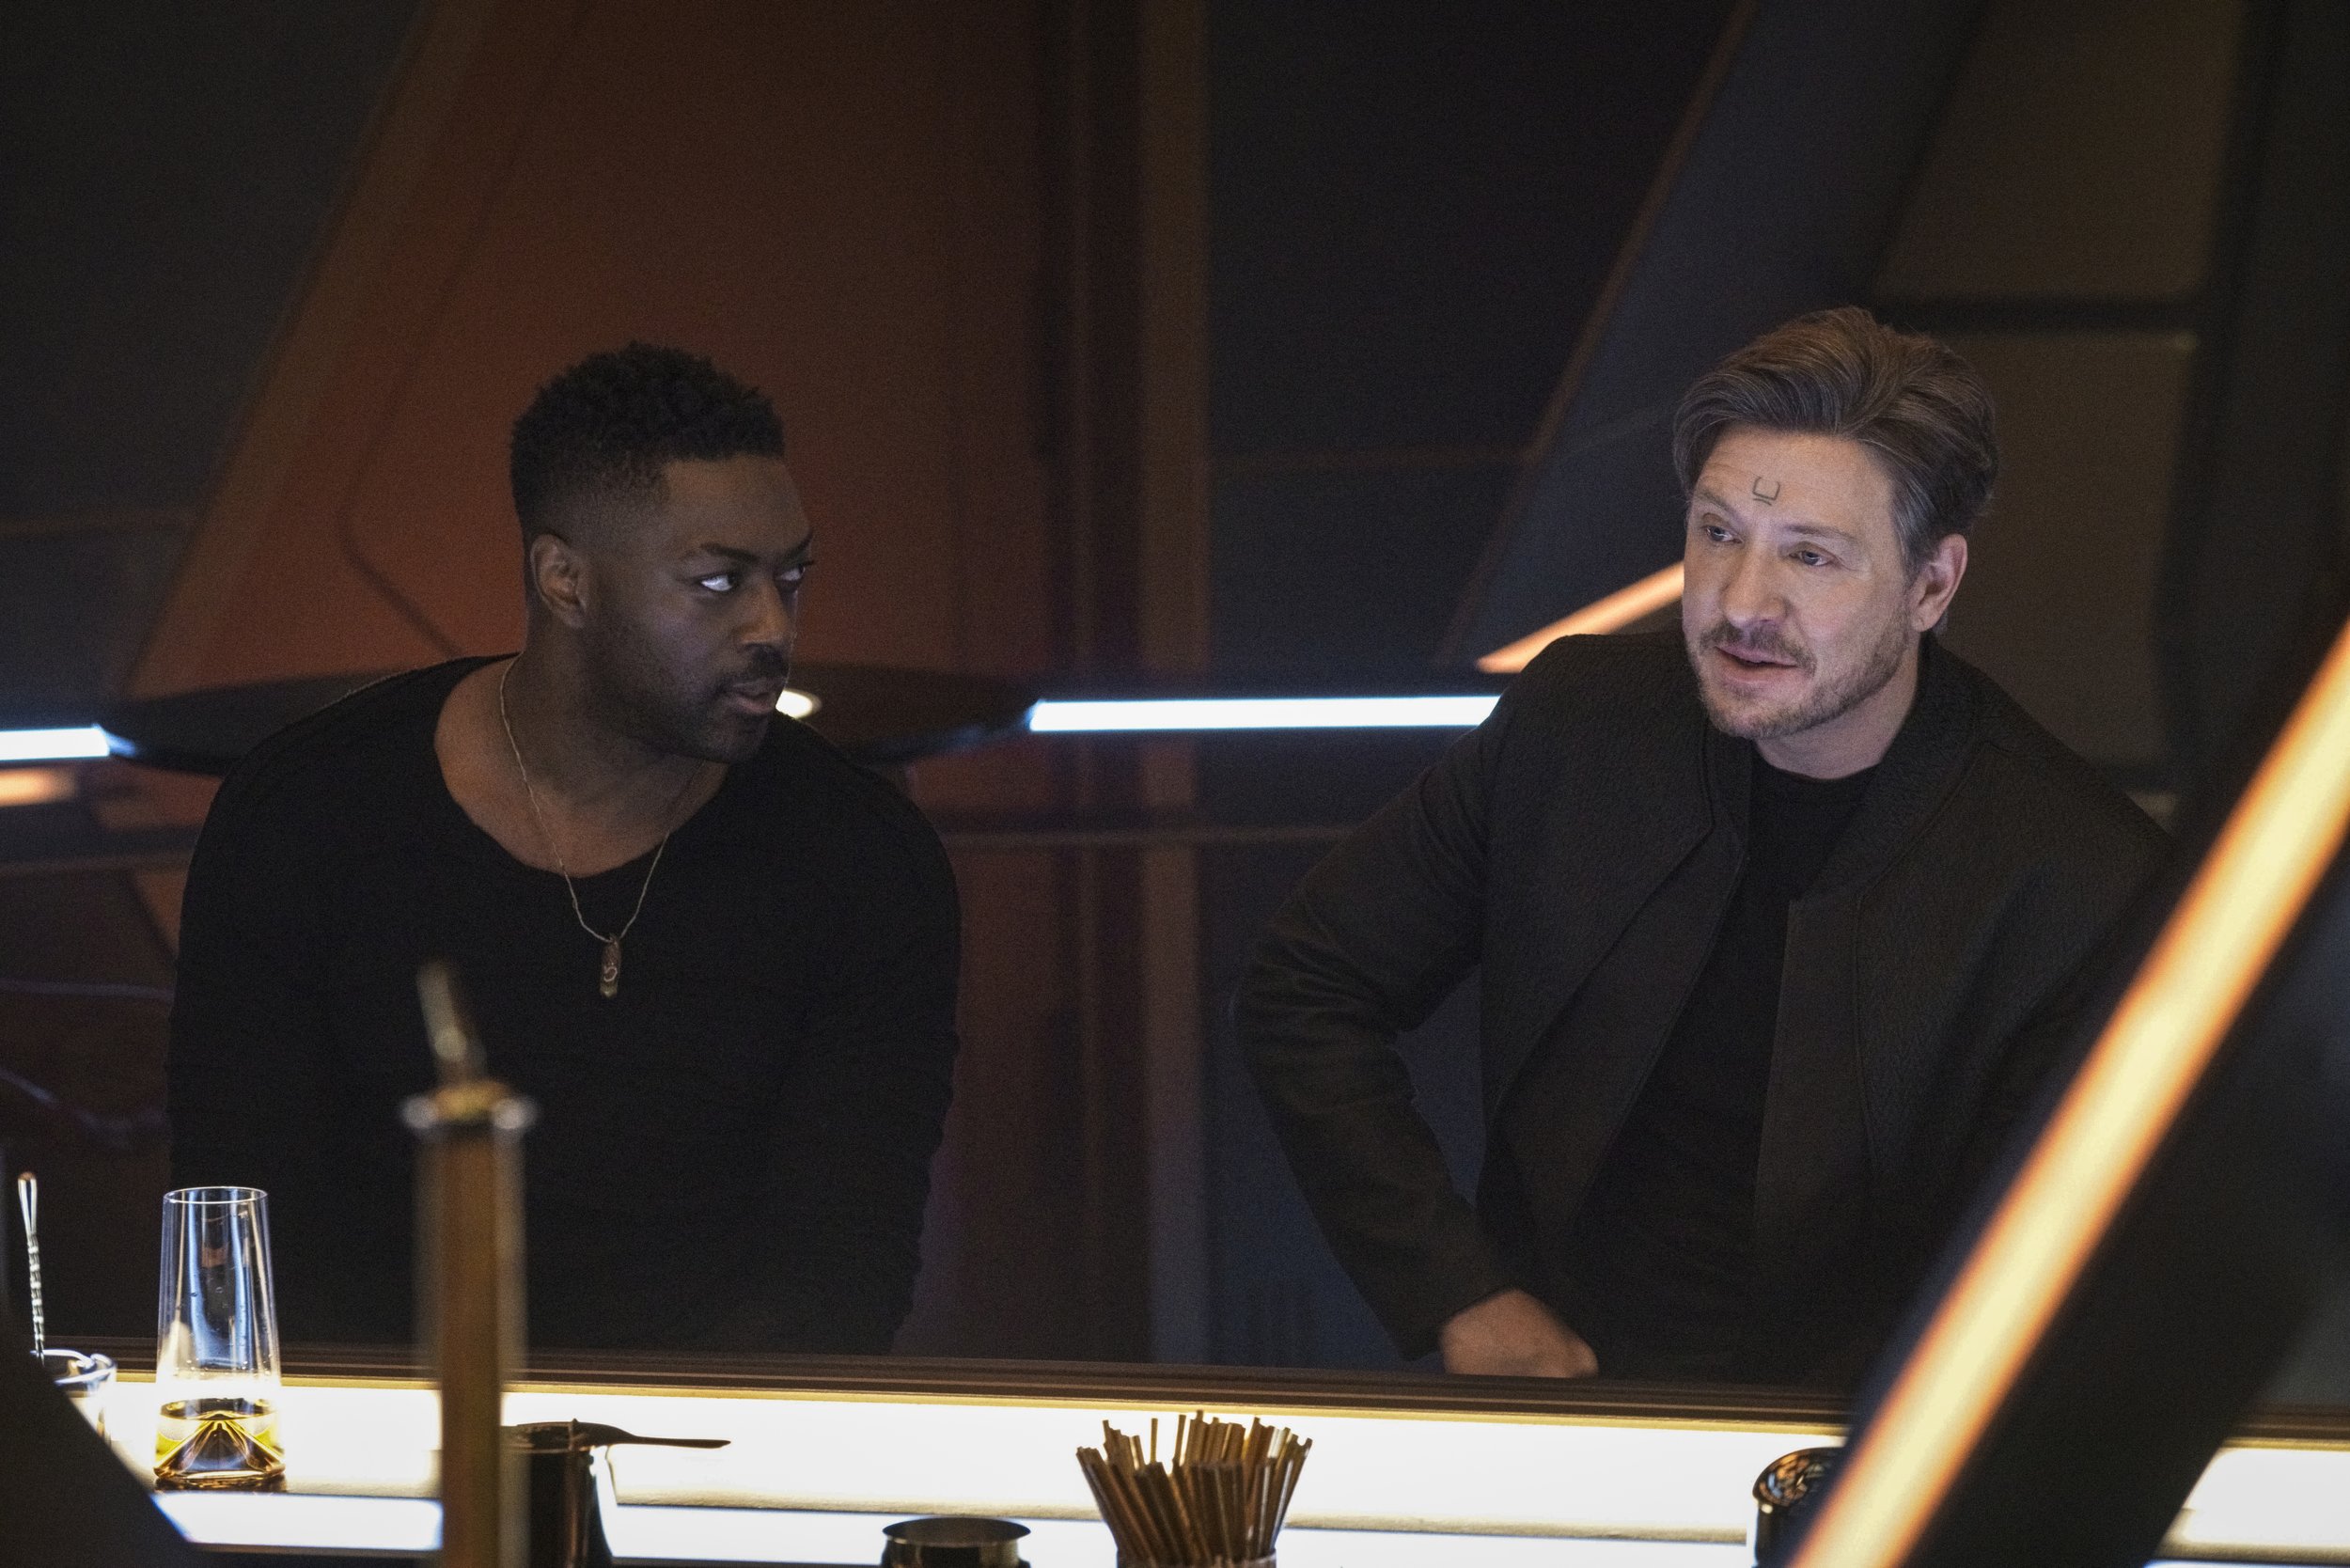   Pictured: David Ajala as Book and Shawn Doyle as Ruon Tarka of the Paramount+ original series STAR TREK: DISCOVERY. Photo Cr: Michael Gibson/Paramount+ (C) 2021 CBS Interactive. All Rights Reserved.  